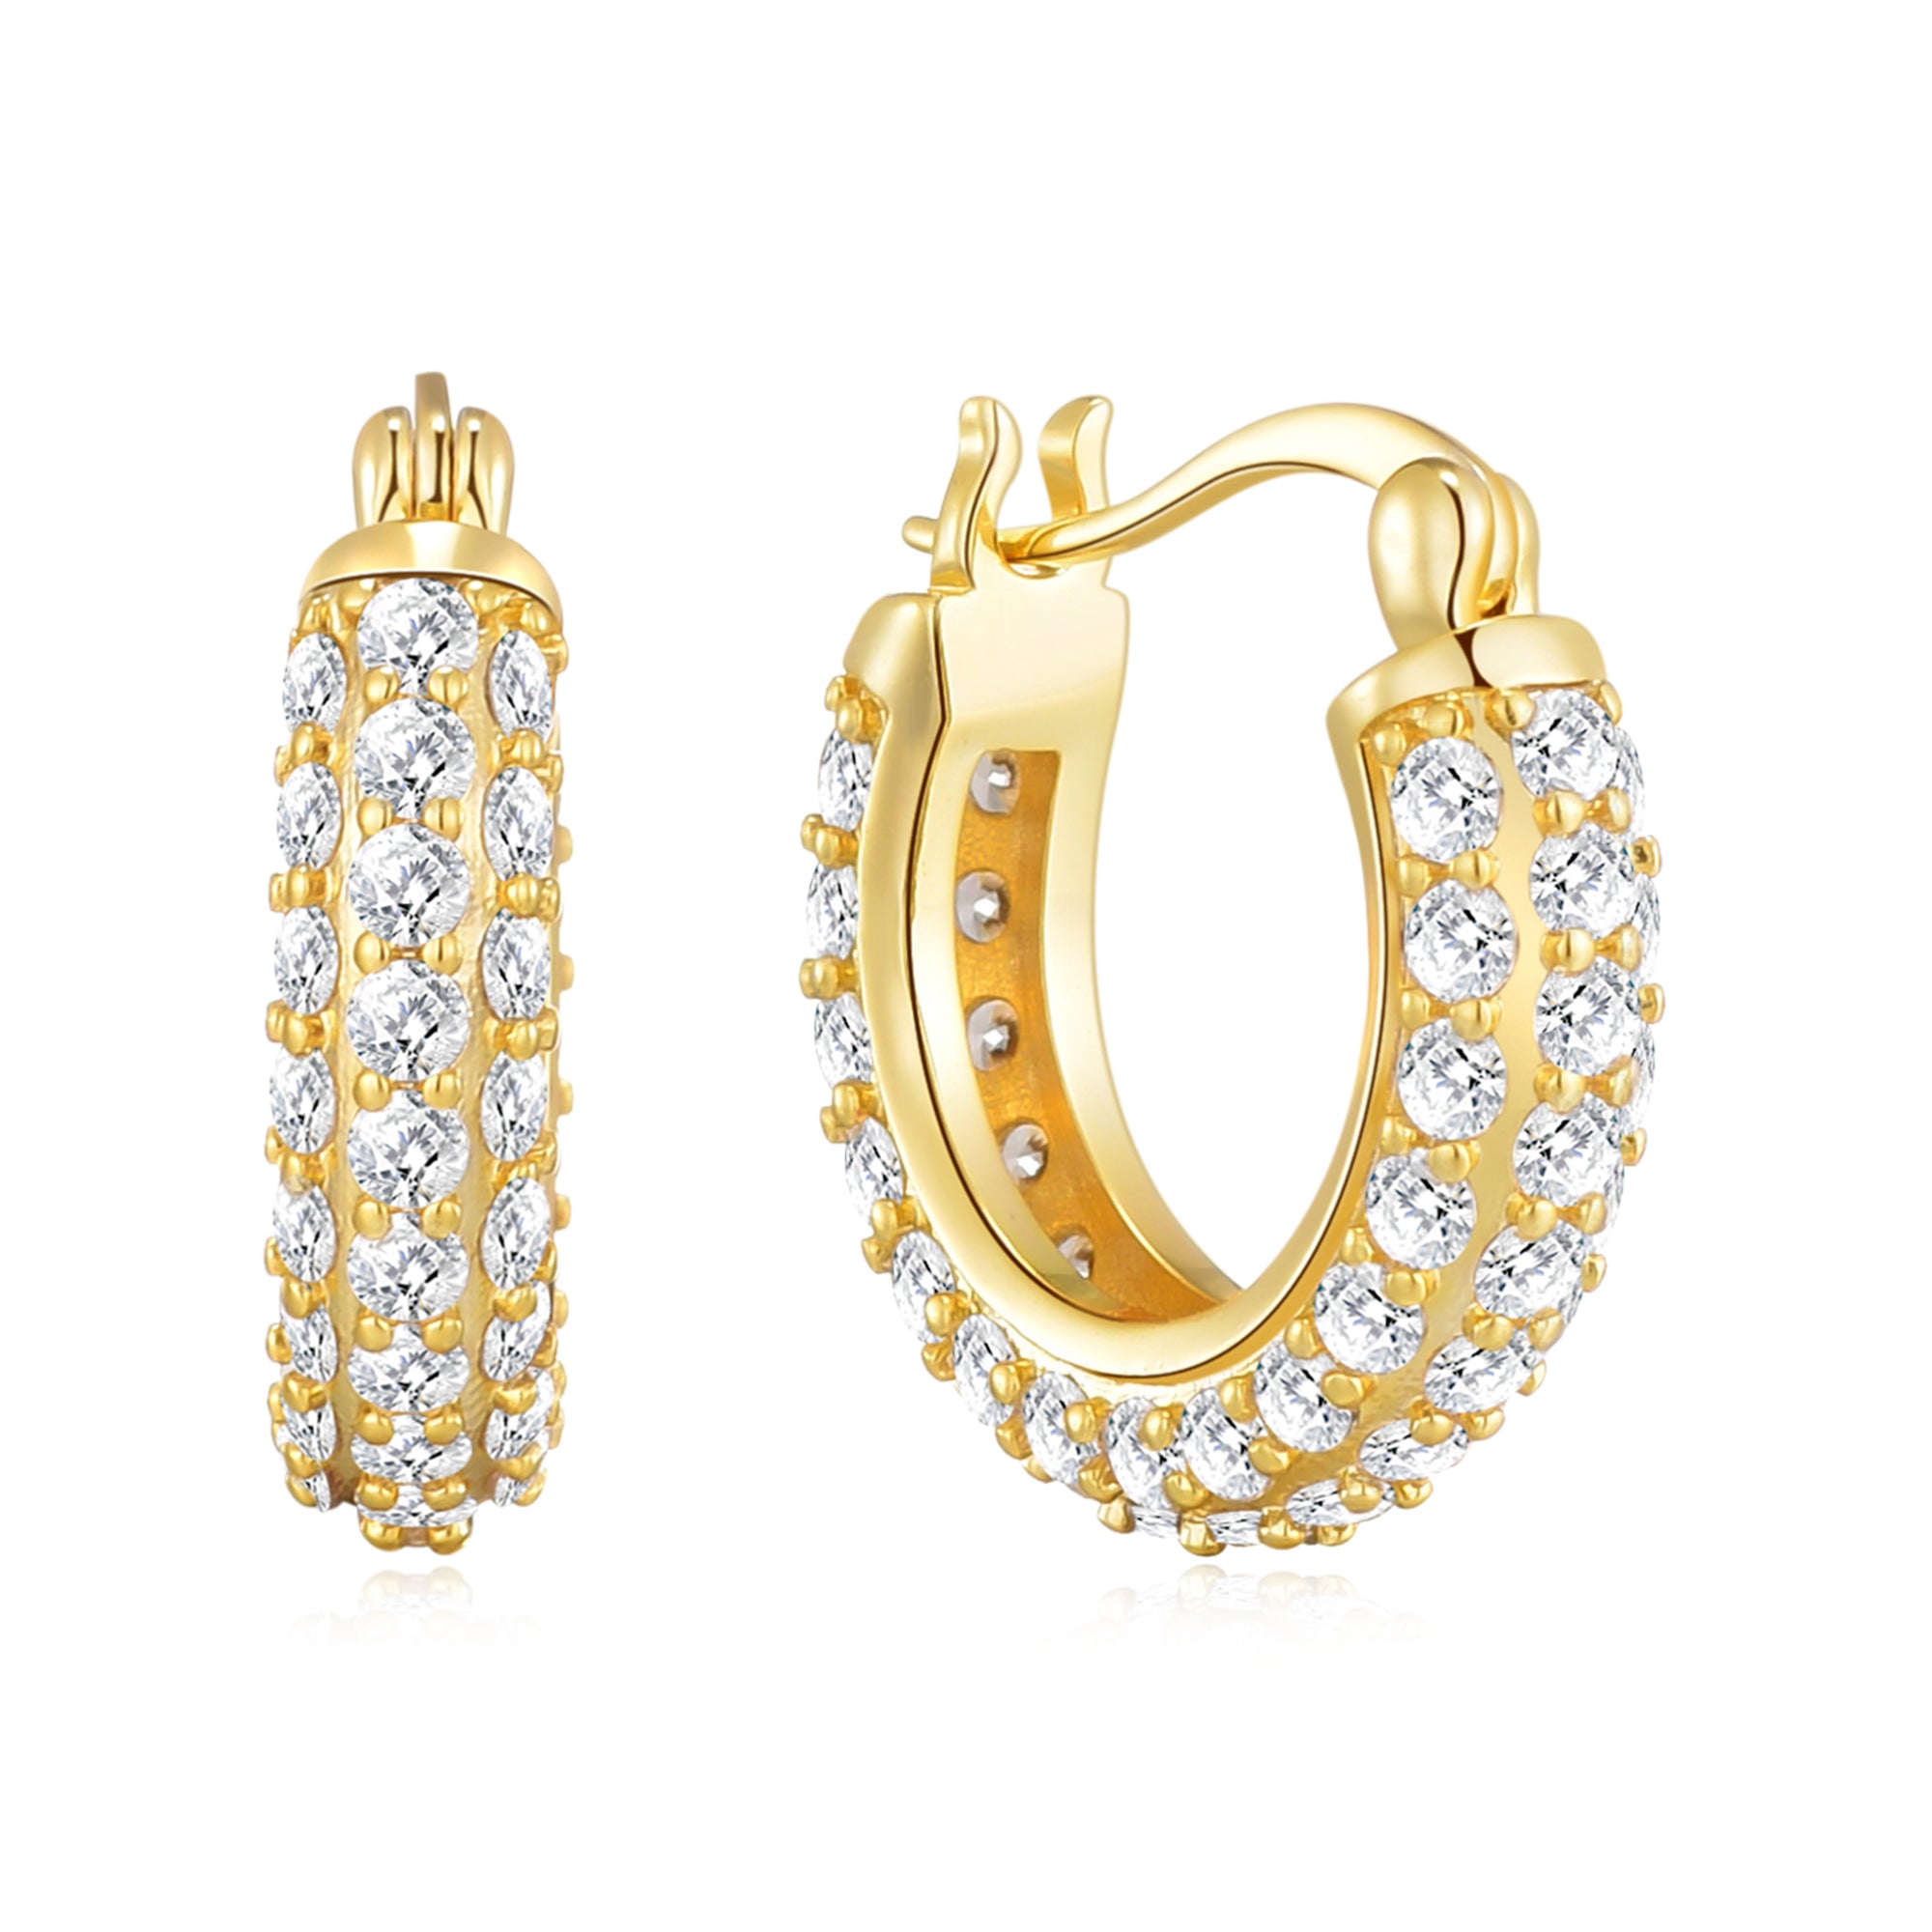 Gold Plated 20mm Pave Hoop Earrings Created with Zircondia® Crystals by Philip Jones Jewellery